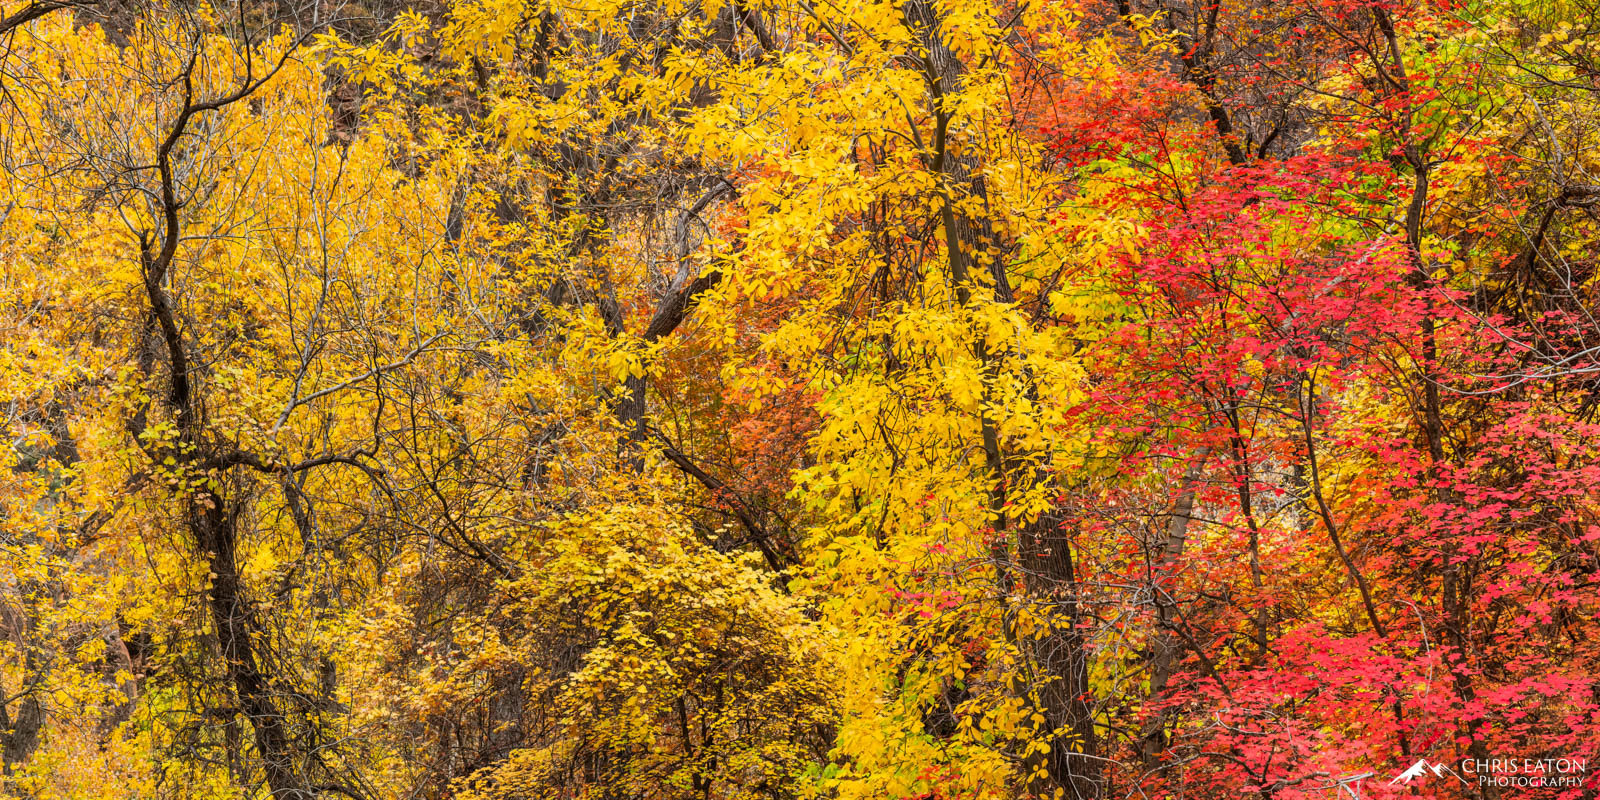 Fall color maples and cottonwoods along the Virgin River in Zion National Park.